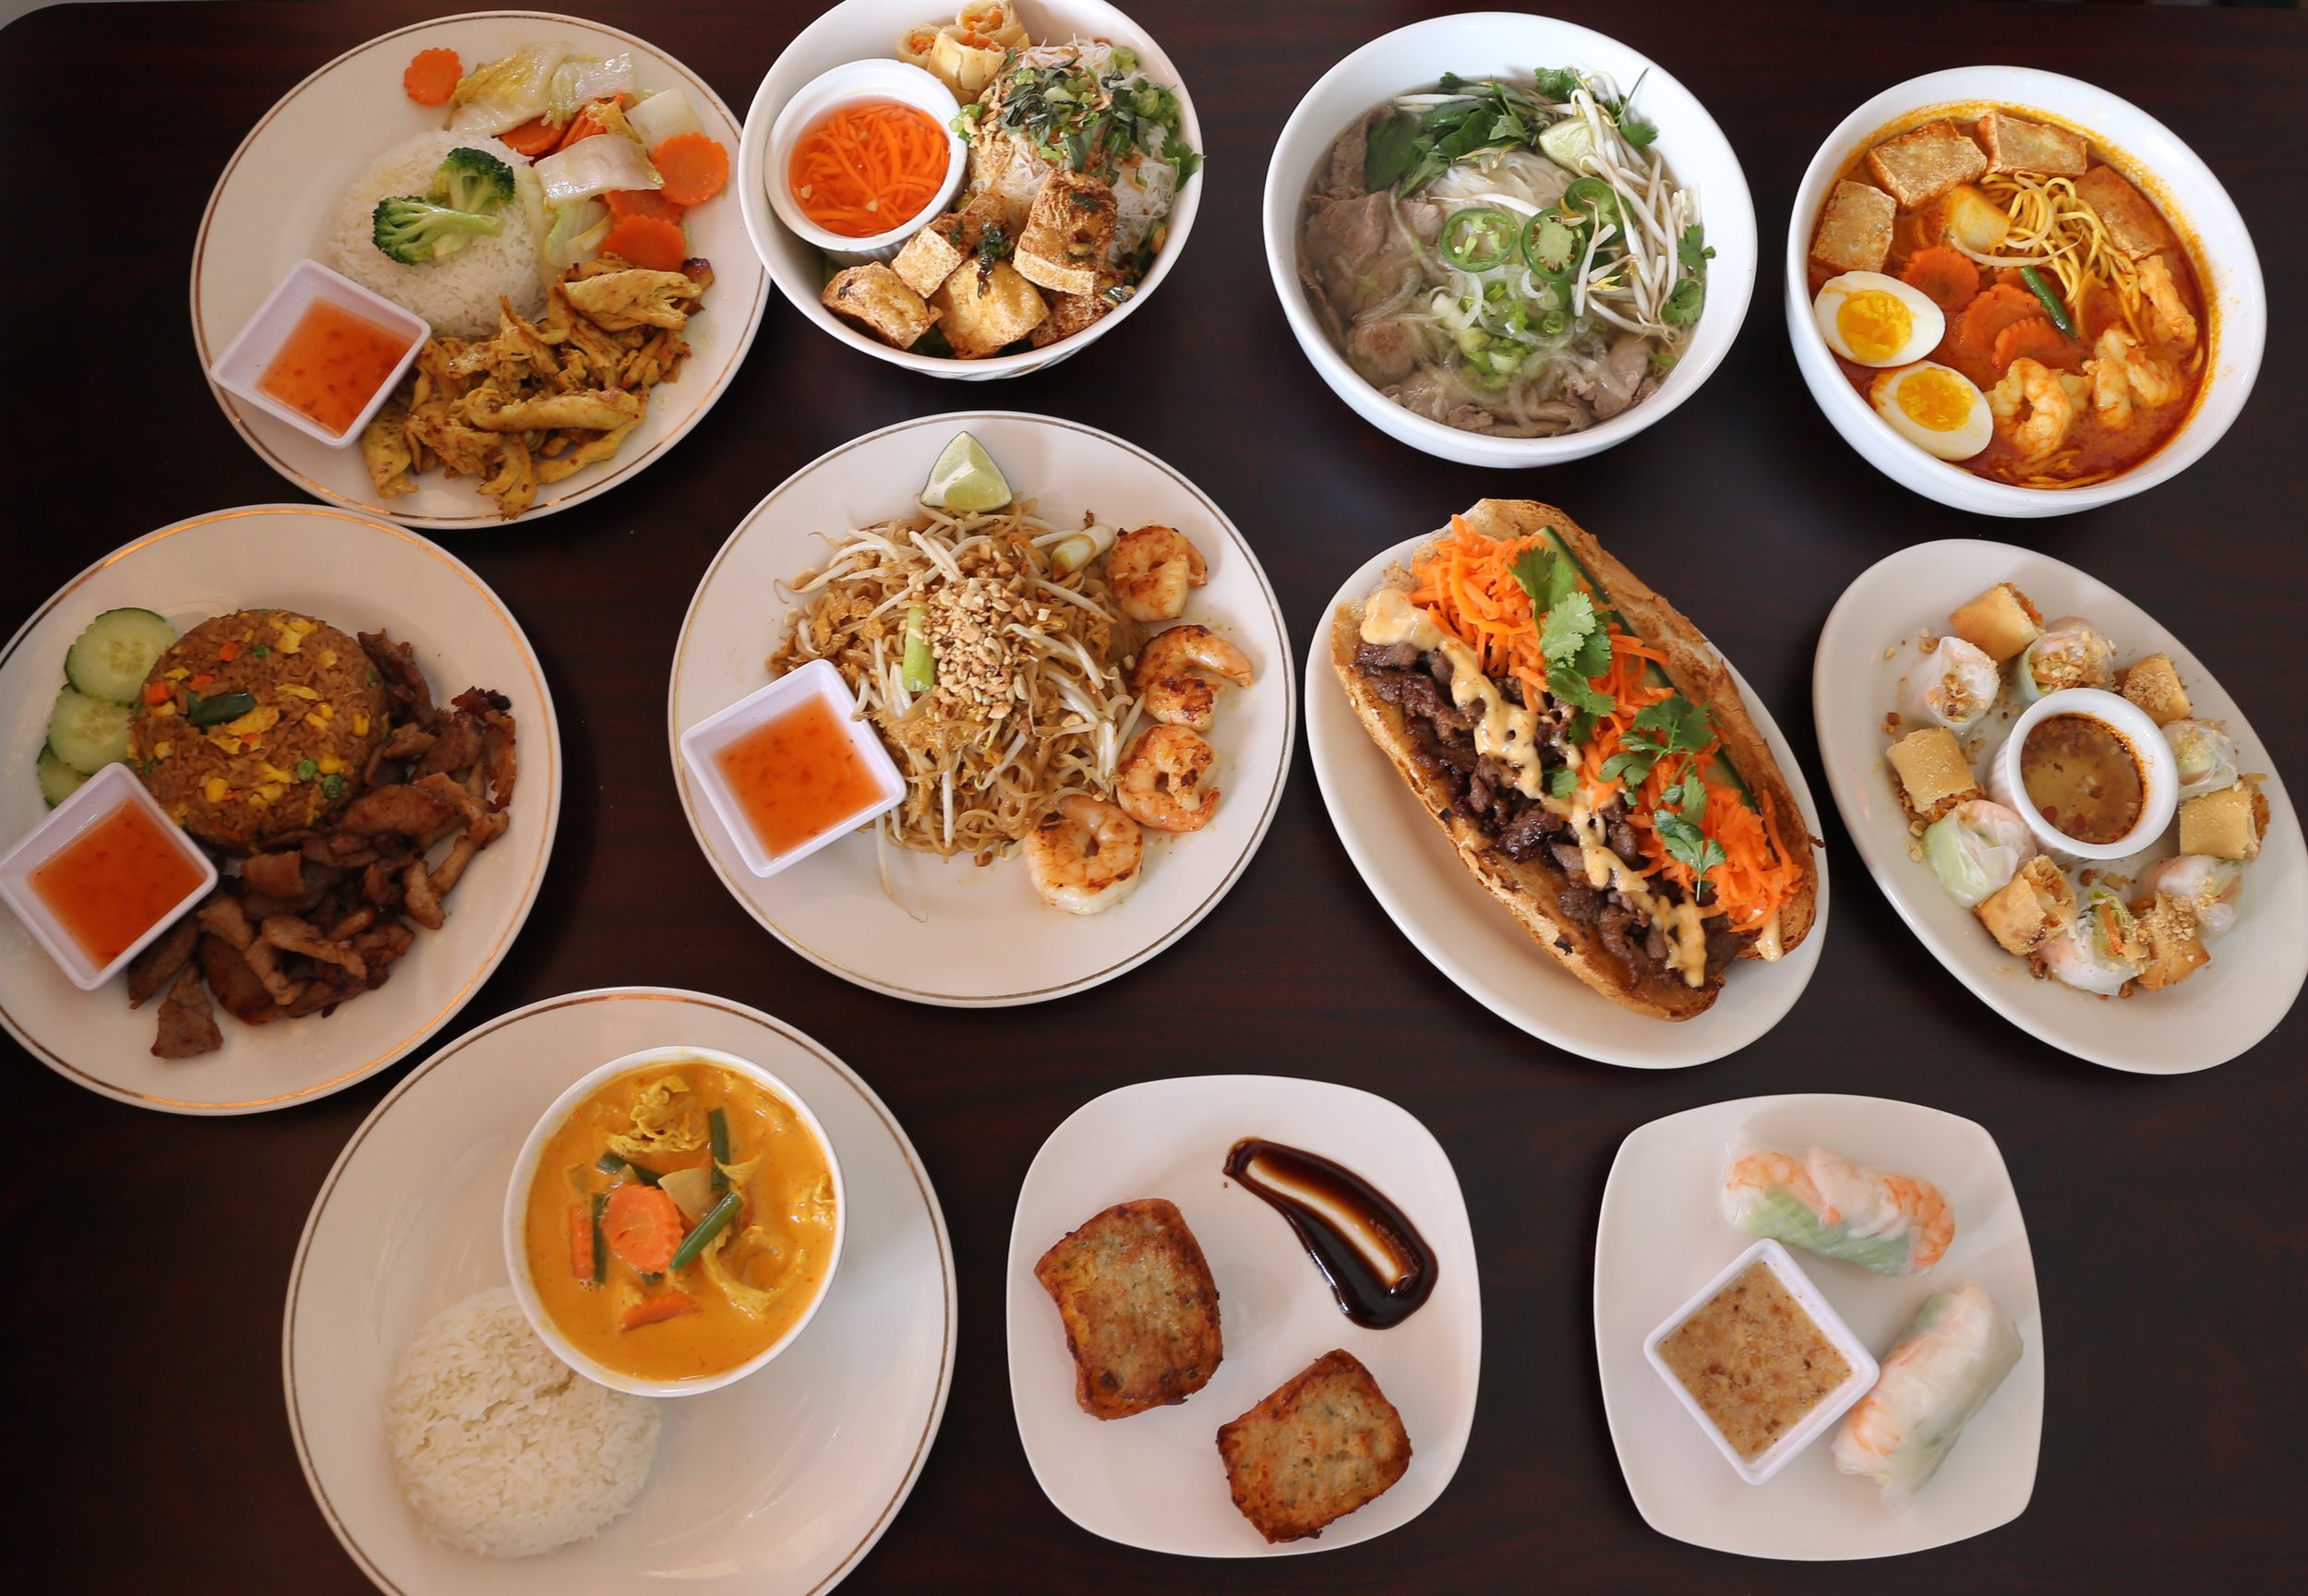 Flavors from Southeast Asia